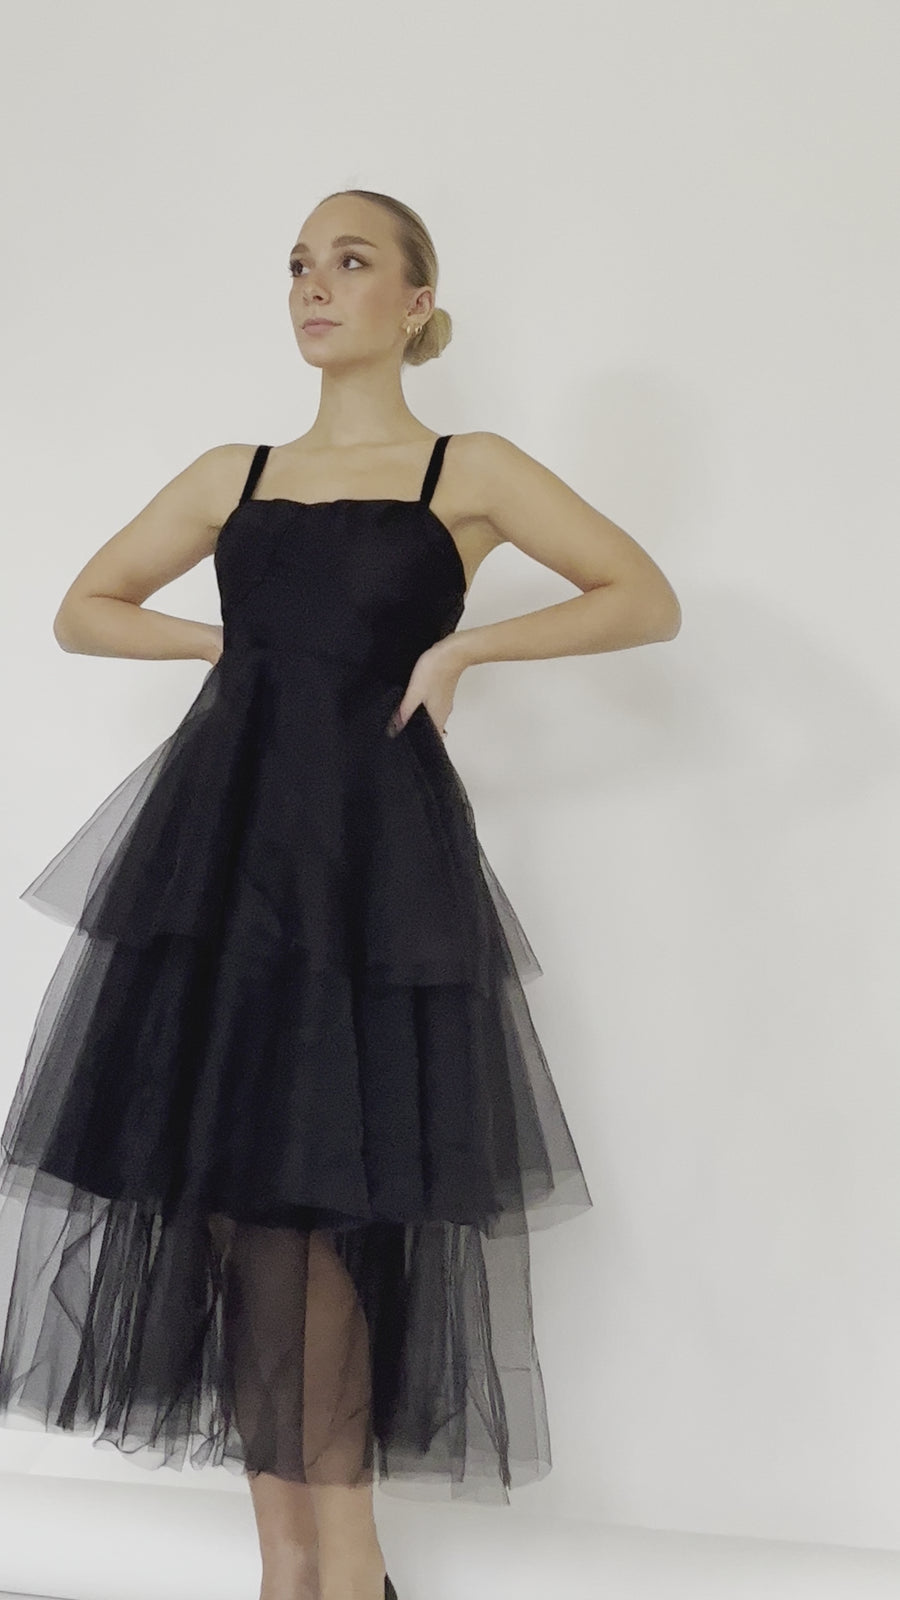 THE TULLE DRESS